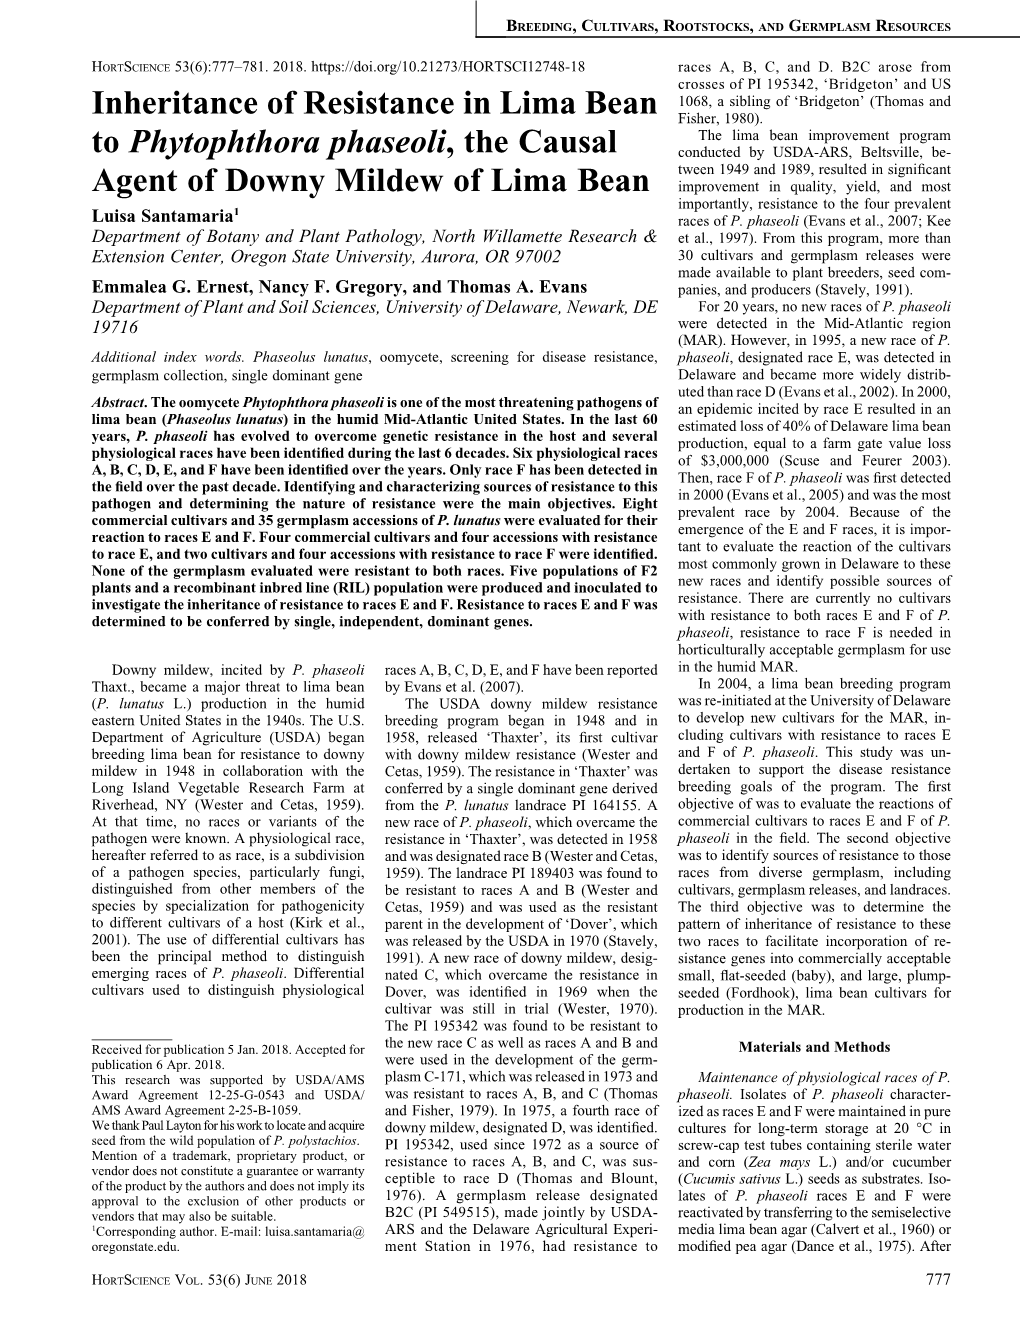 Inheritance of Resistance in Lima Bean to Phytophthora Phaseoli, the Causal Agent of Downy Mildew of Lima Bean